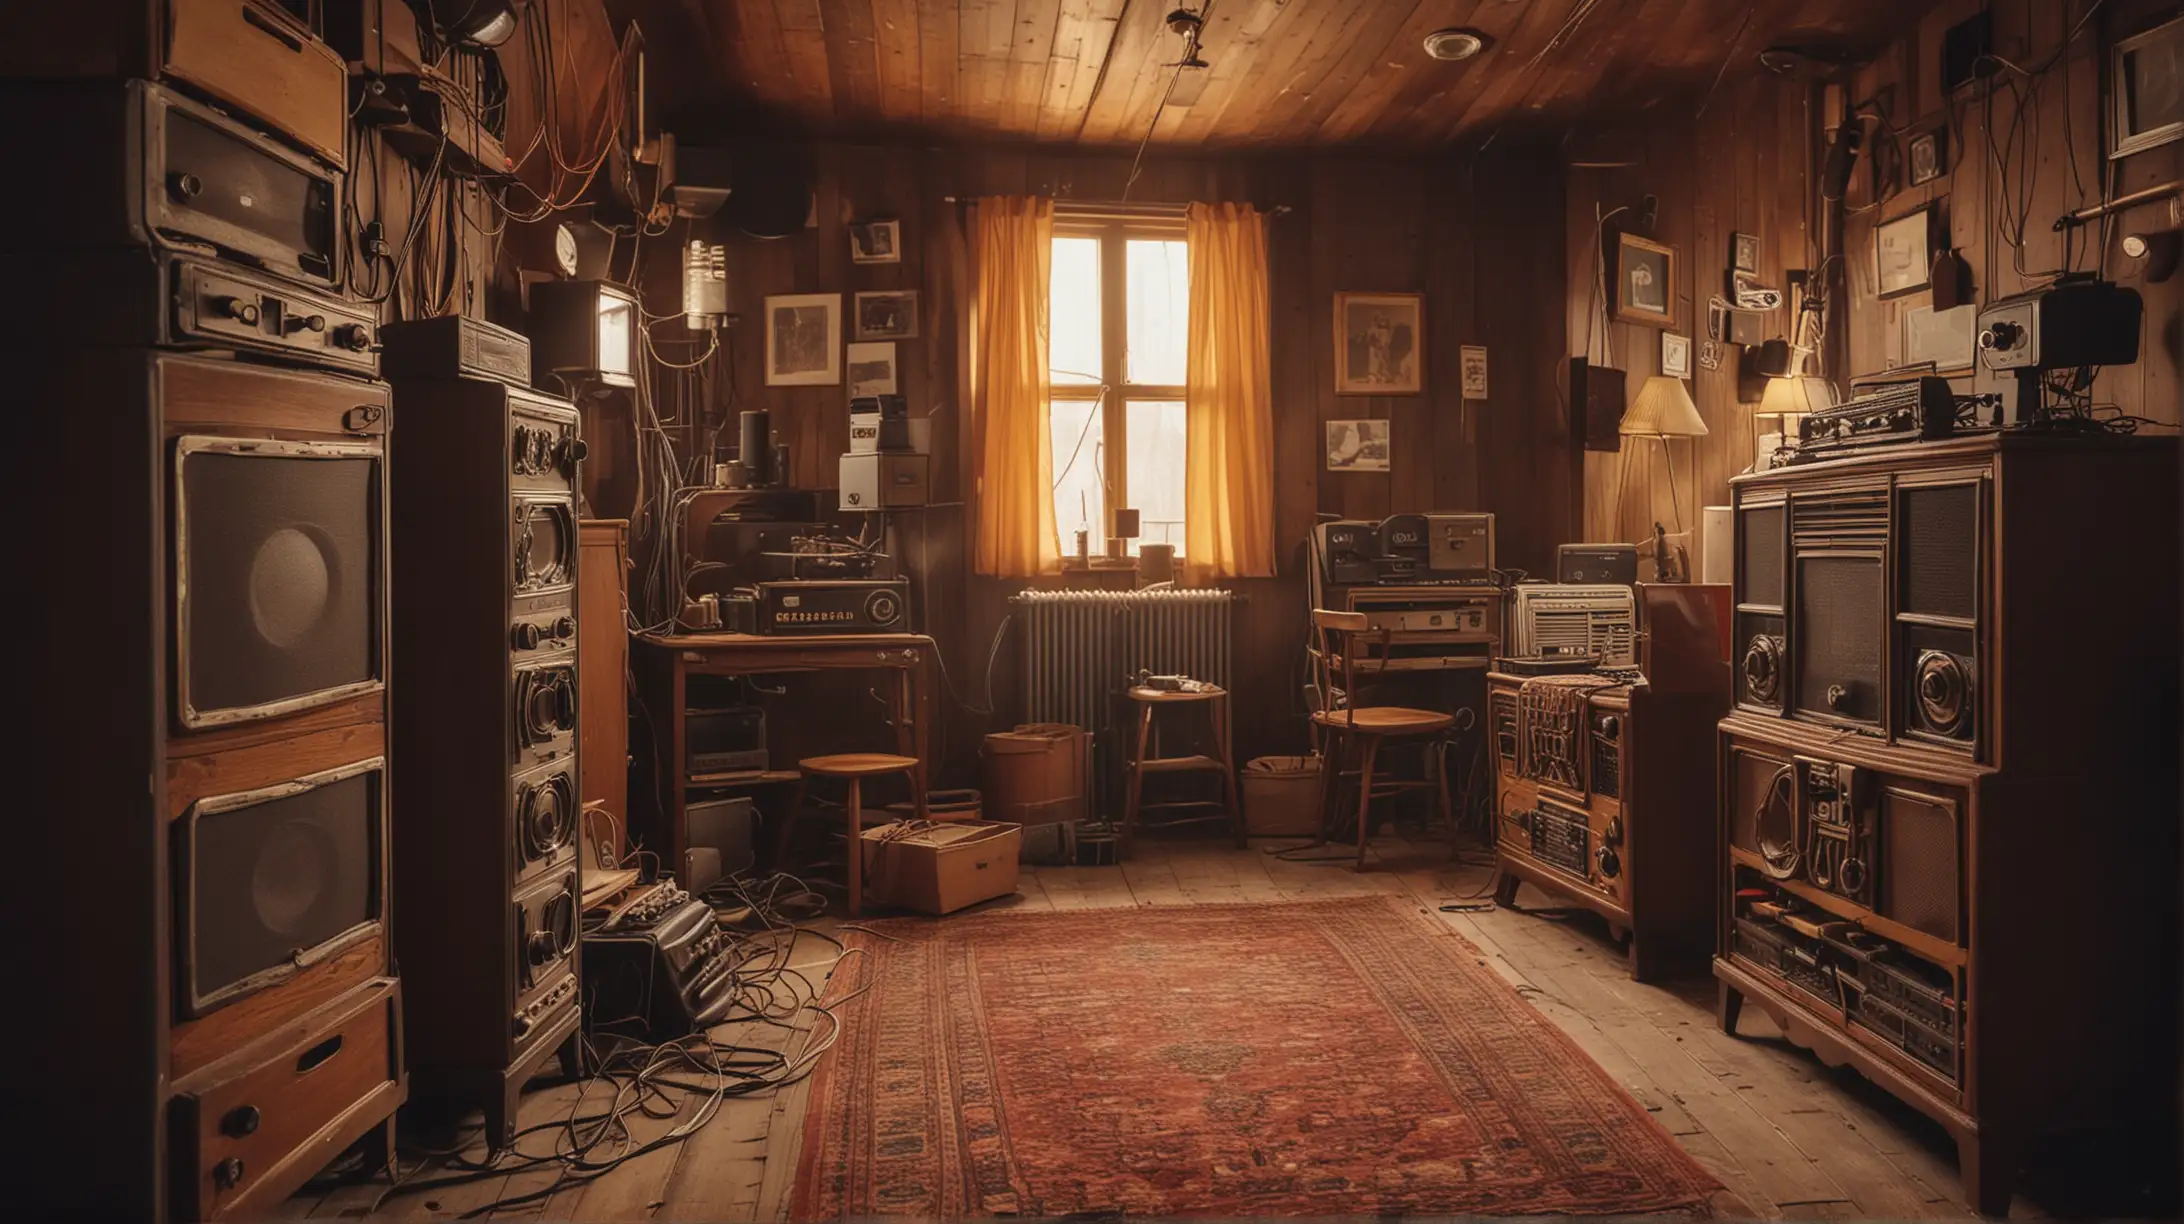 A large industrial-themed room filled with stacks of vintage old-time radios, and colored electrical wires running everywhere, one large wood-burning stove in the foreground. Cinematic lighting.